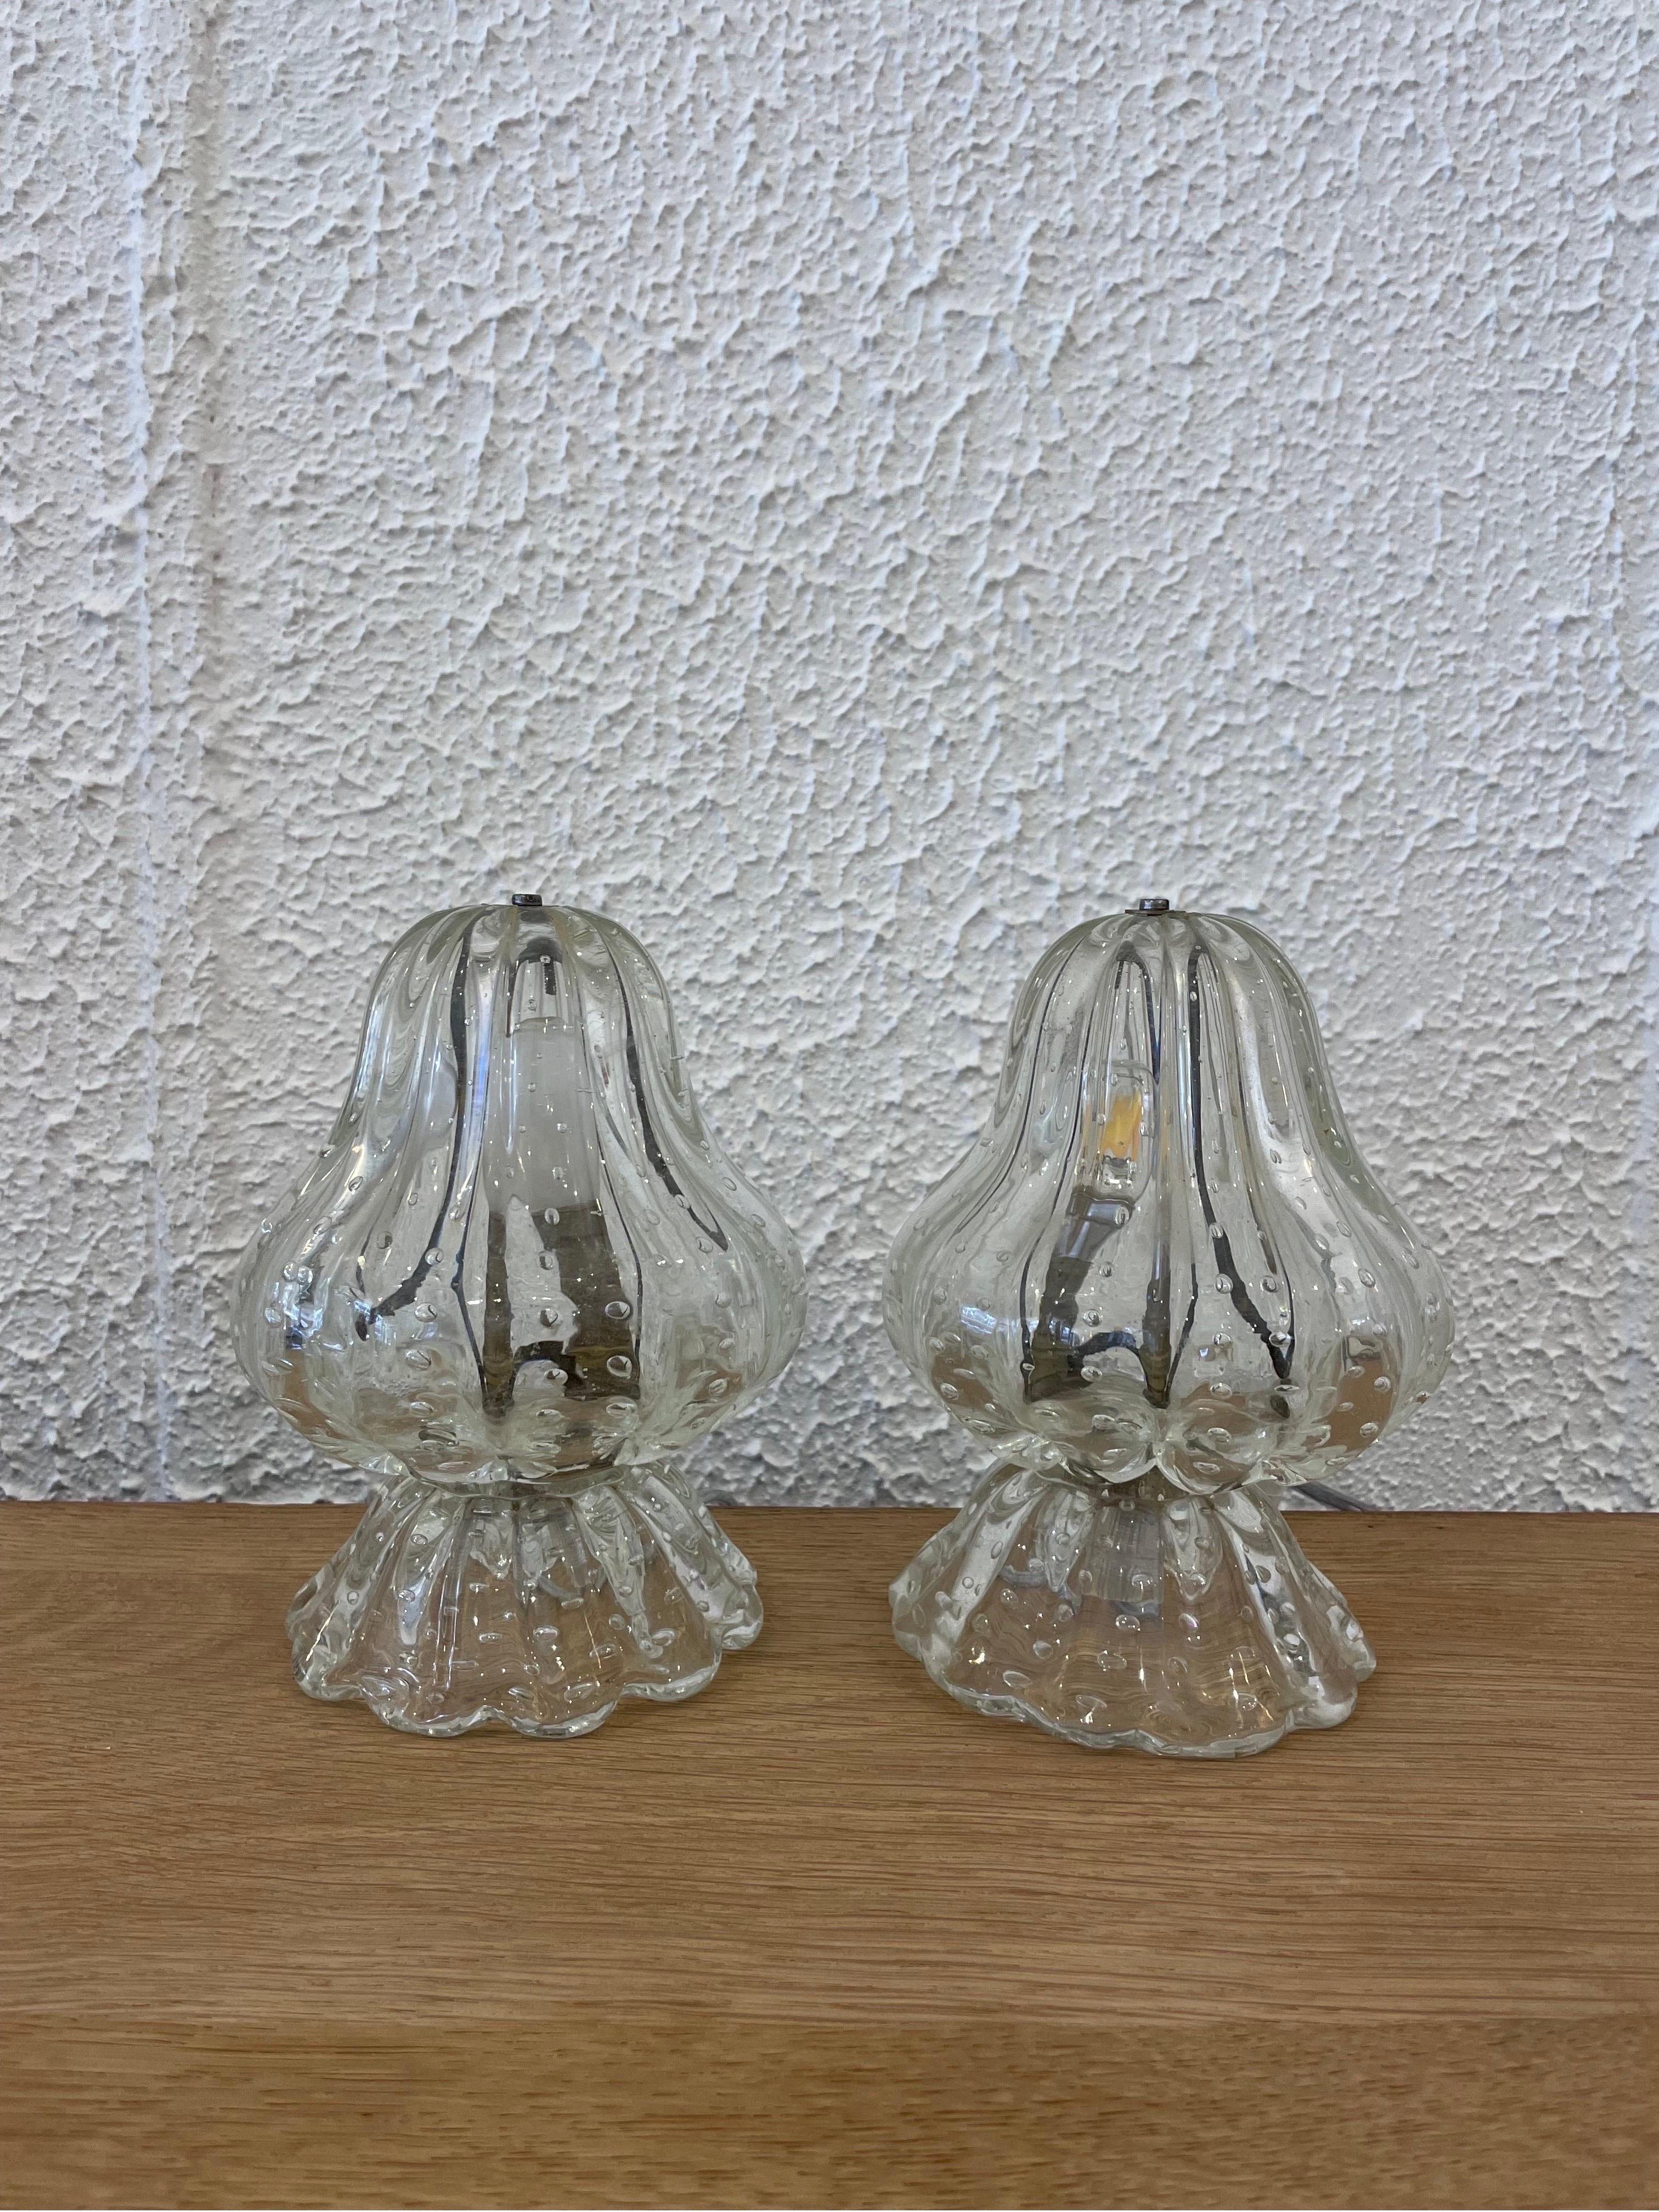 Unique 1940s Barovier & Toso Bullicante mushroom lamps in excellent vintage condition. Sold as a pair 